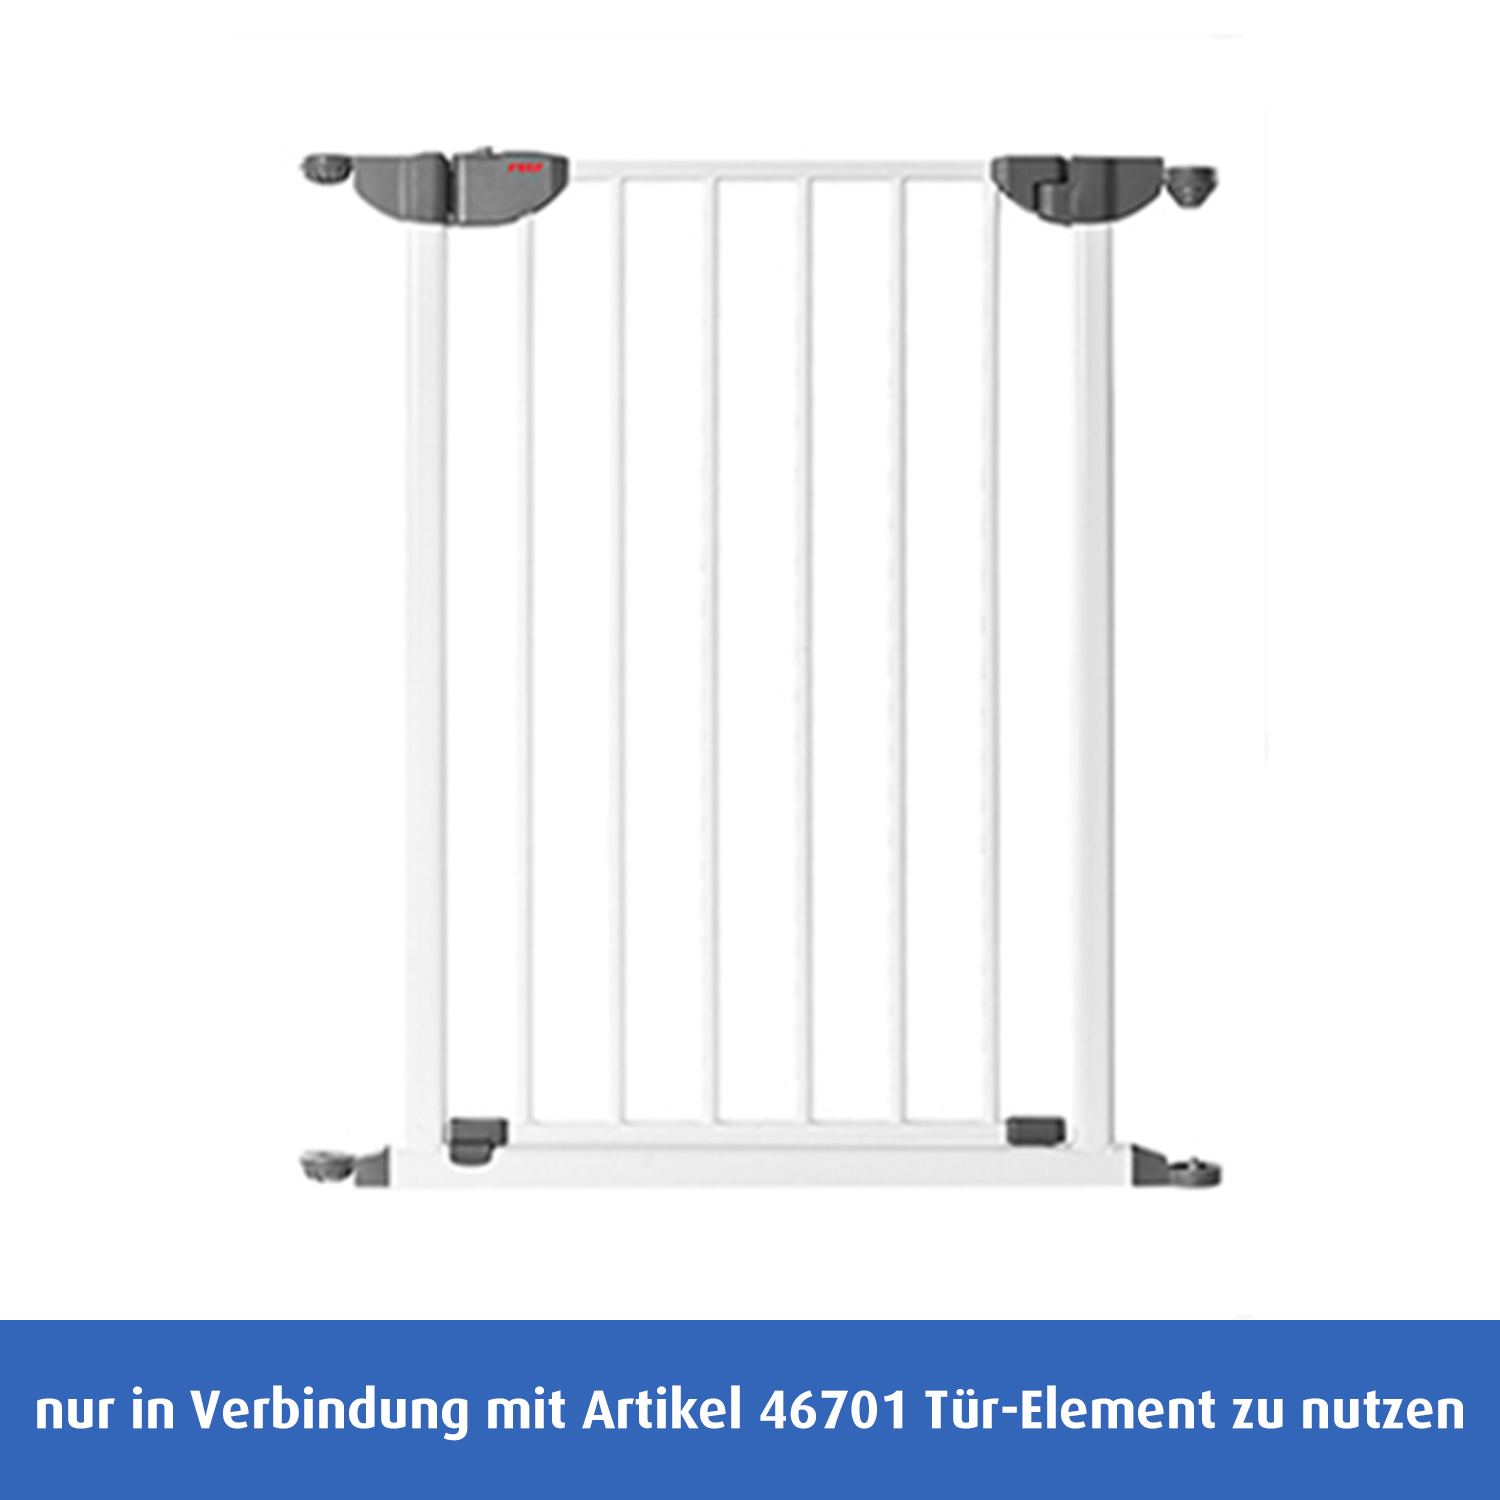 MyGate Modul based safety gate and room divider, extension 20 cm